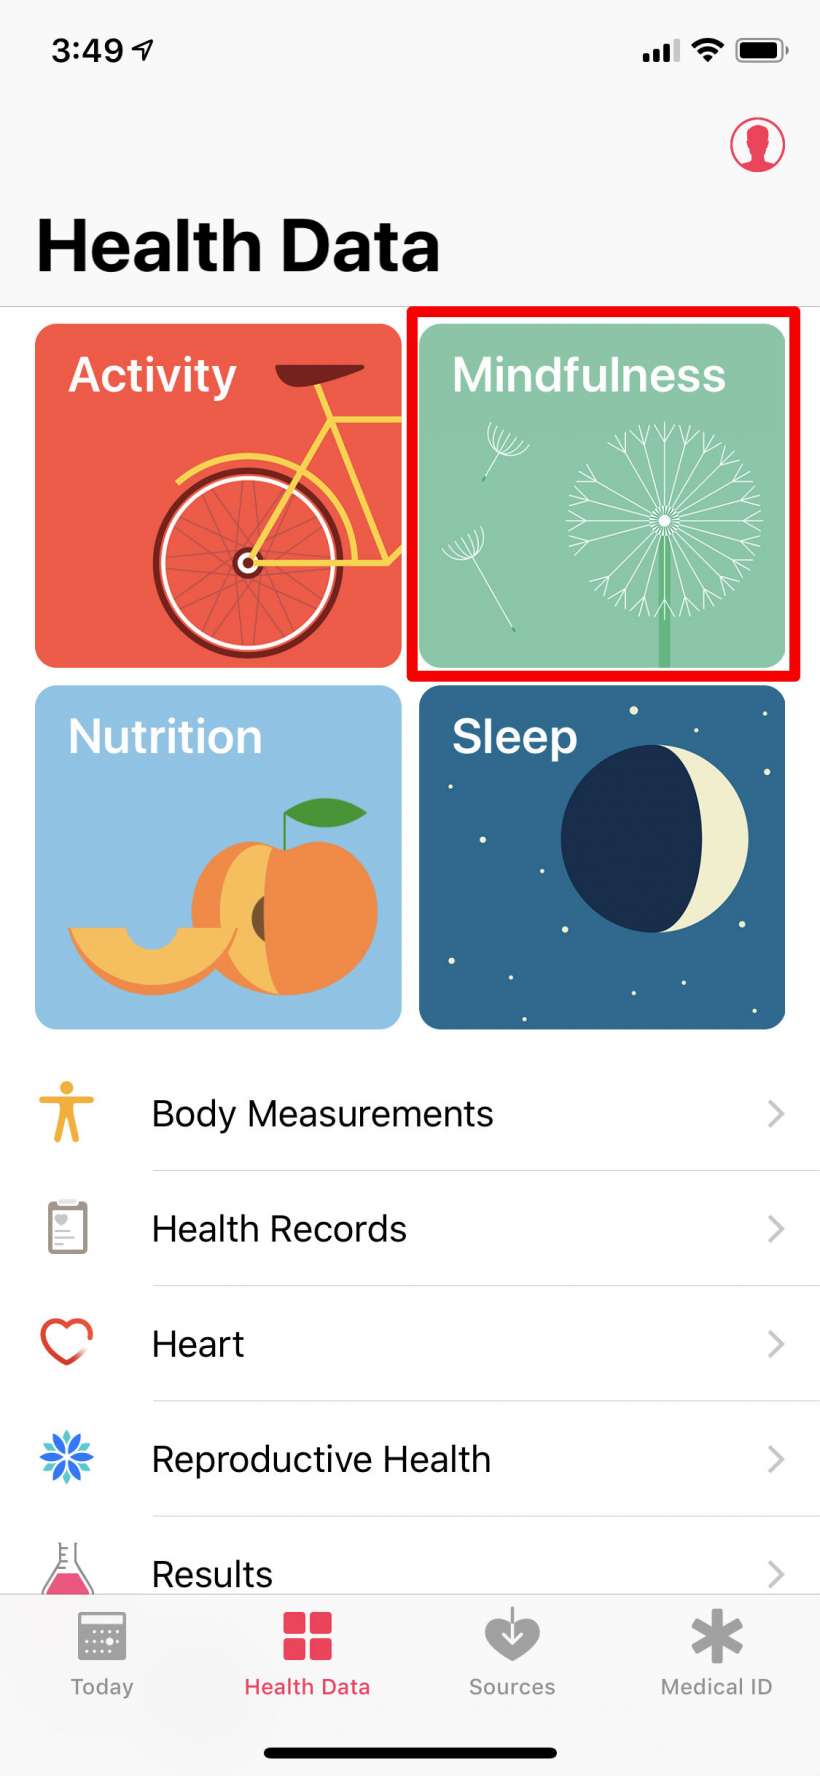 How to keep track of your mindful minutes with your Health app on iPhone and iPad.